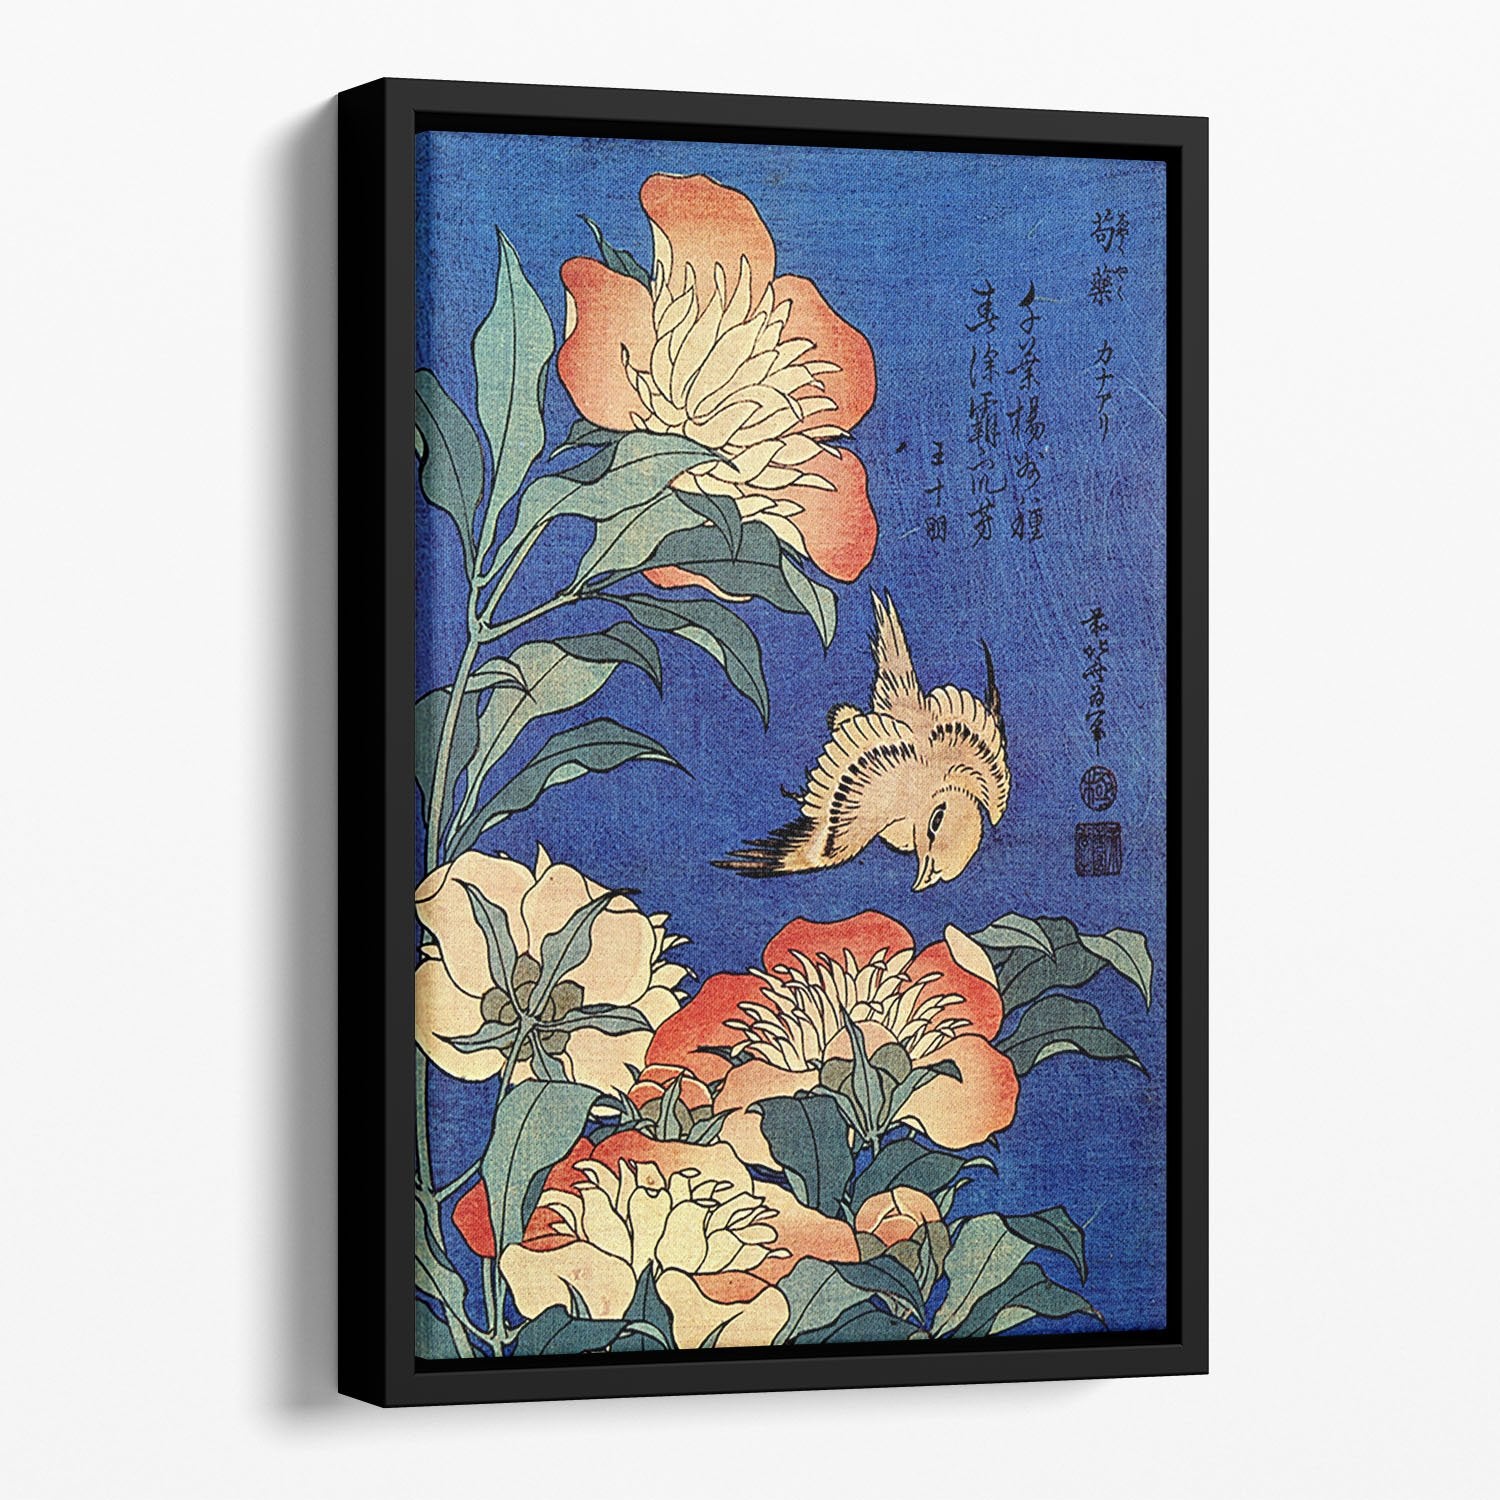 Flowers by Hokusai Floating Framed Canvas